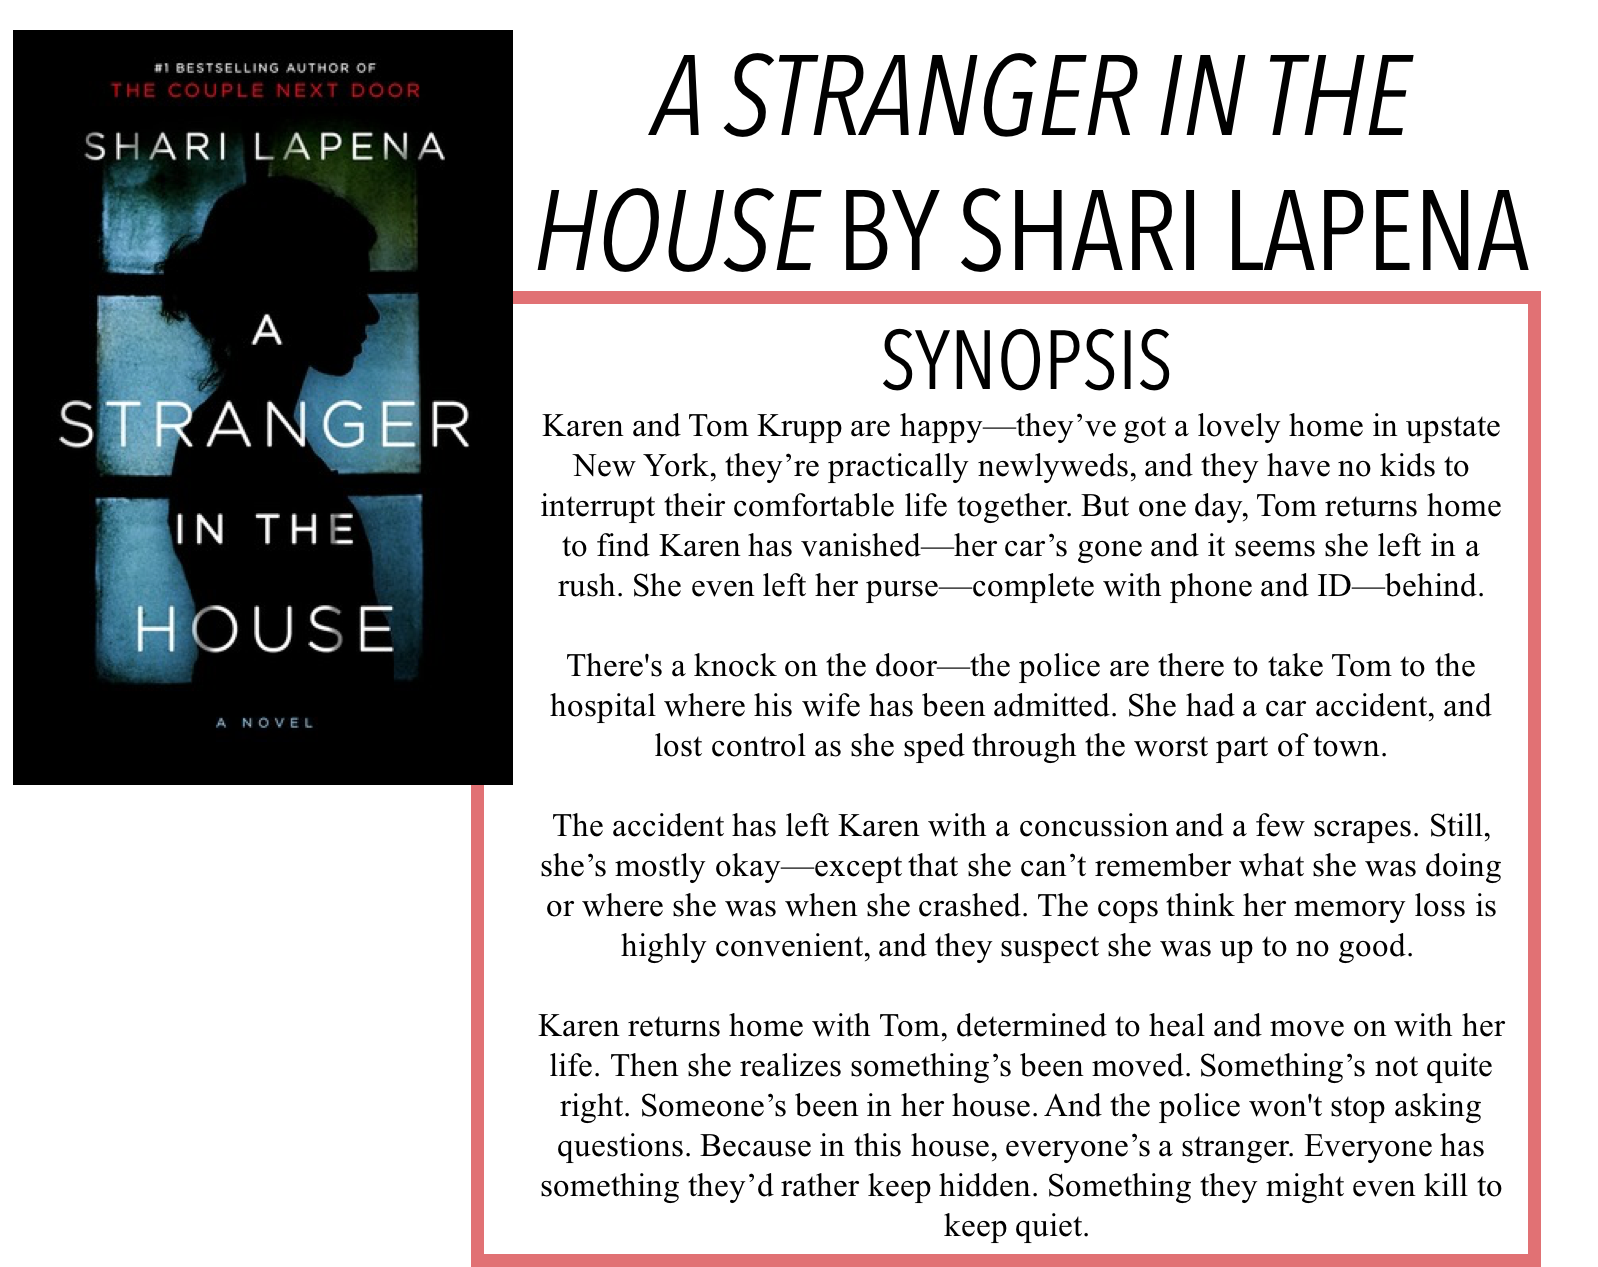 A STRANGER IN THE HOUSE BY SHARI LAPENA